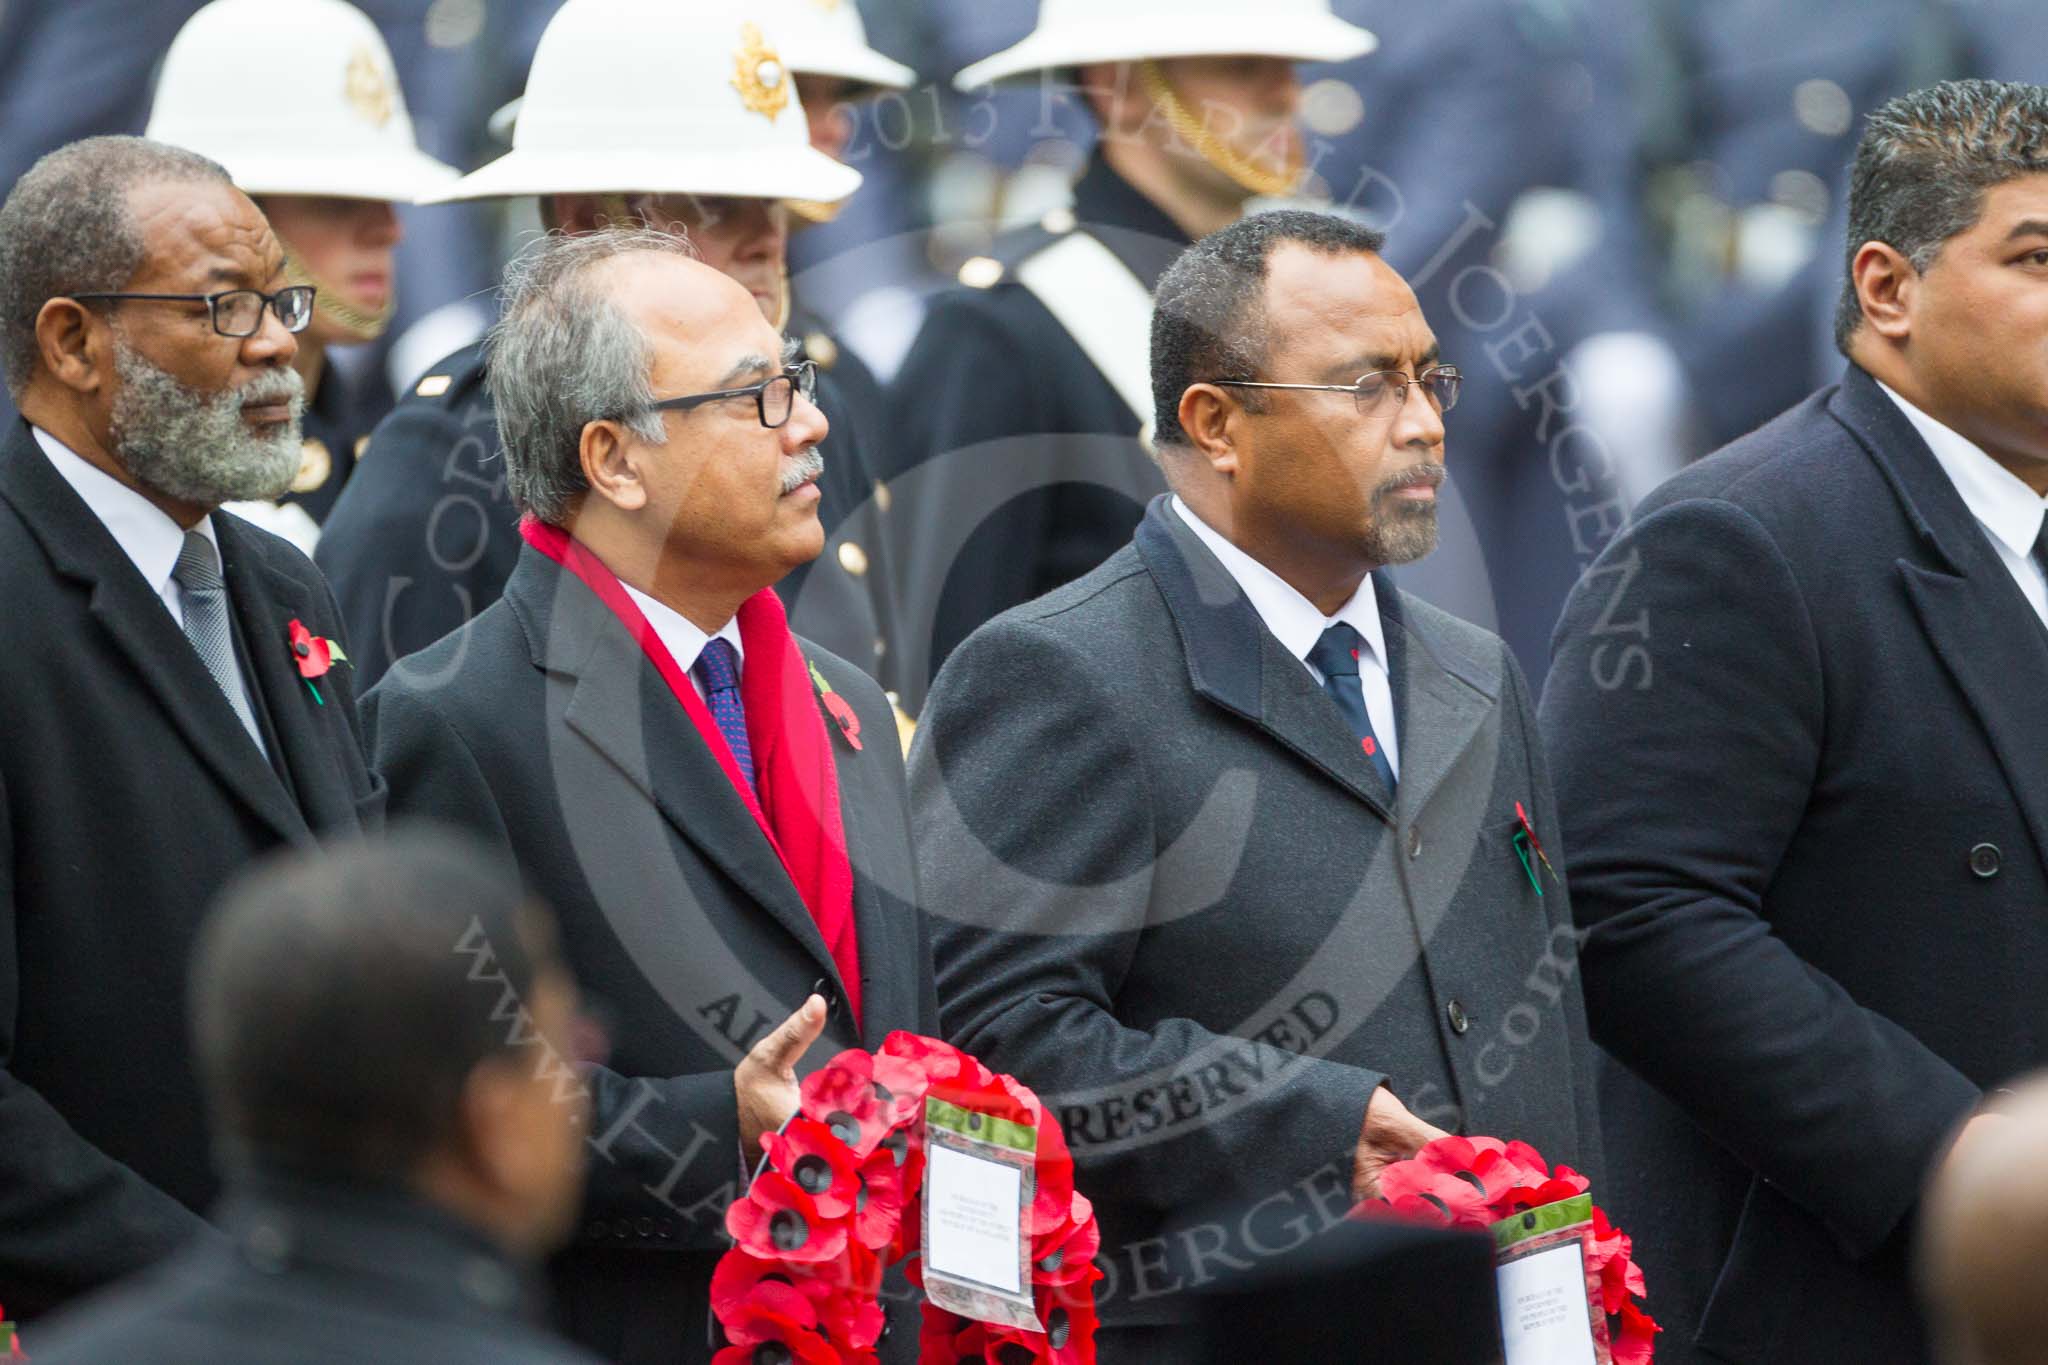 Remembrance Sunday at the Cenotaph 2015: The High Commissioner of The Bahamas, the High Commissioner of Bangladesh, and the High Commissioner of Fiji with their wreaths at the Cenotaph. Image #115, 08 November 2015 10:57 Whitehall, London, UK